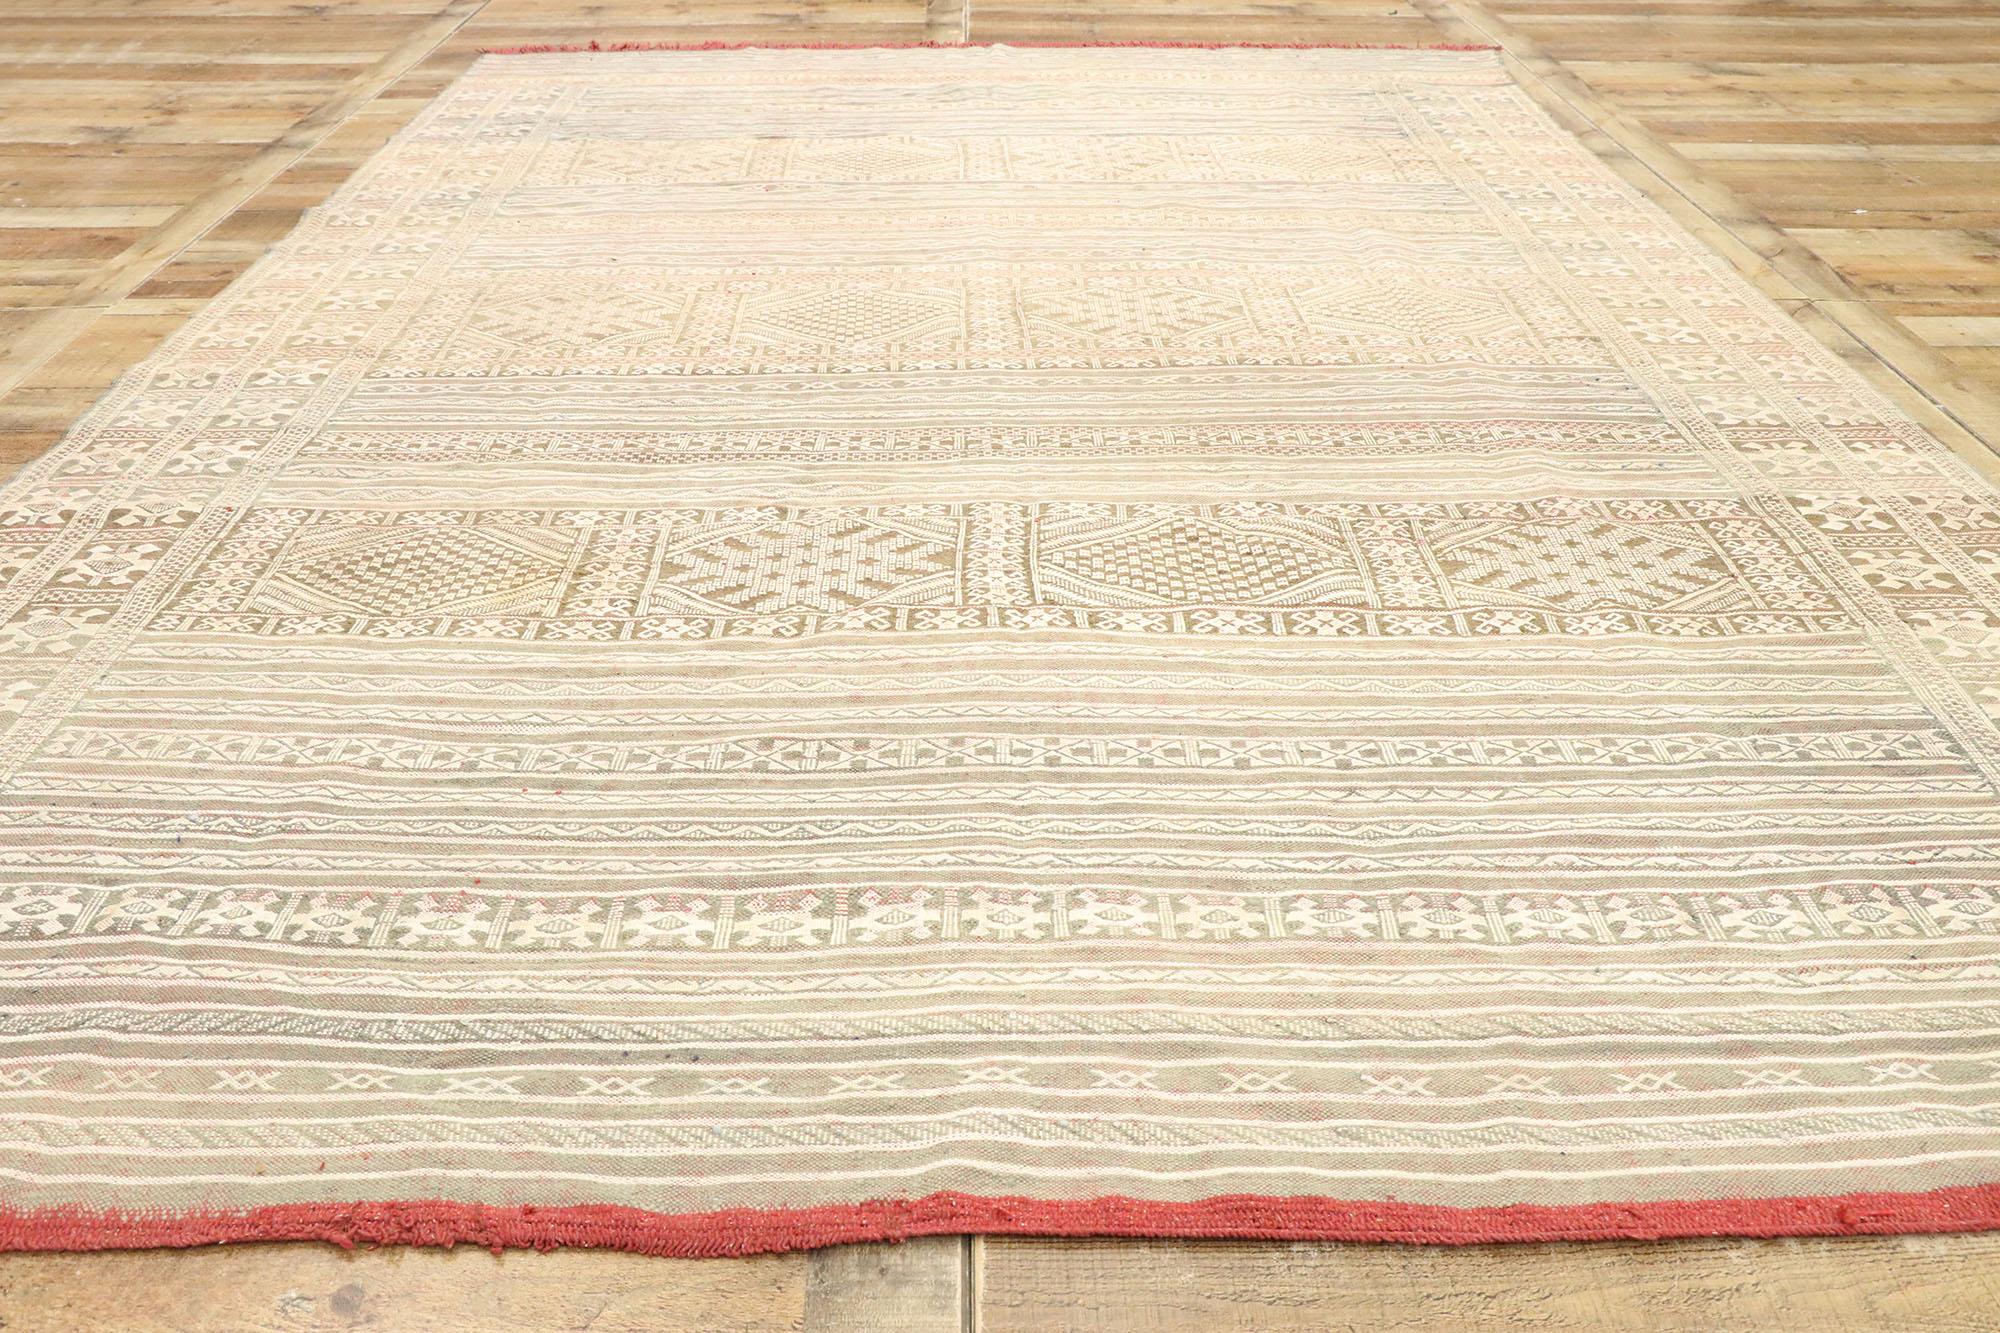 Wool Vintage Zemmour Moroccan Kilim Rug by Berber Tribes of Morocco For Sale